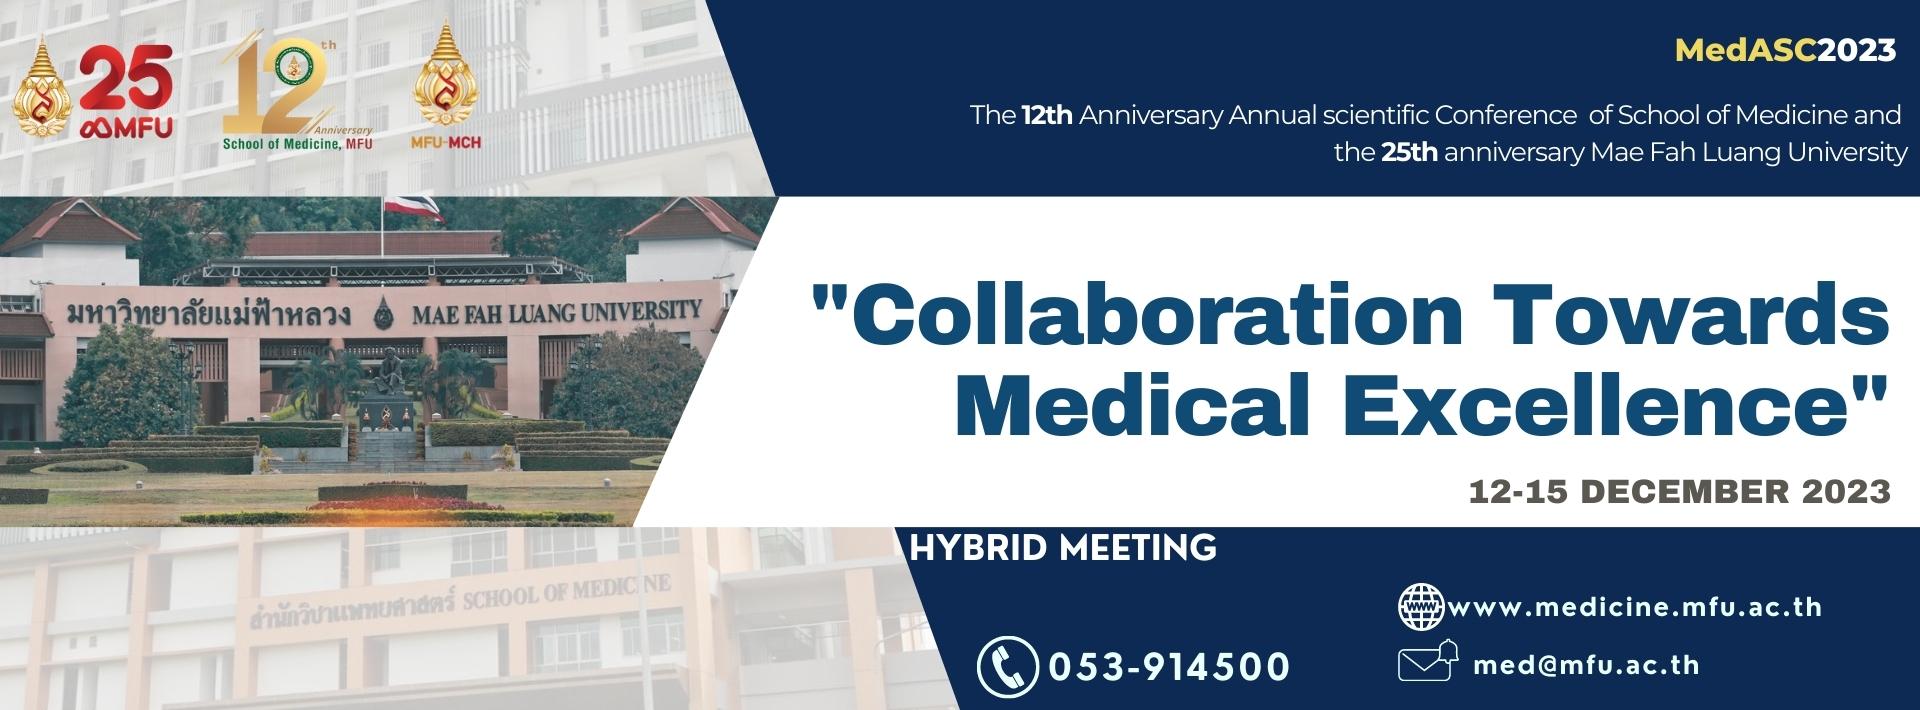 Call for Participations and Submissions: The 12th Anniversary Annual Scientific Conference of School of Medicine (MedASC2023)